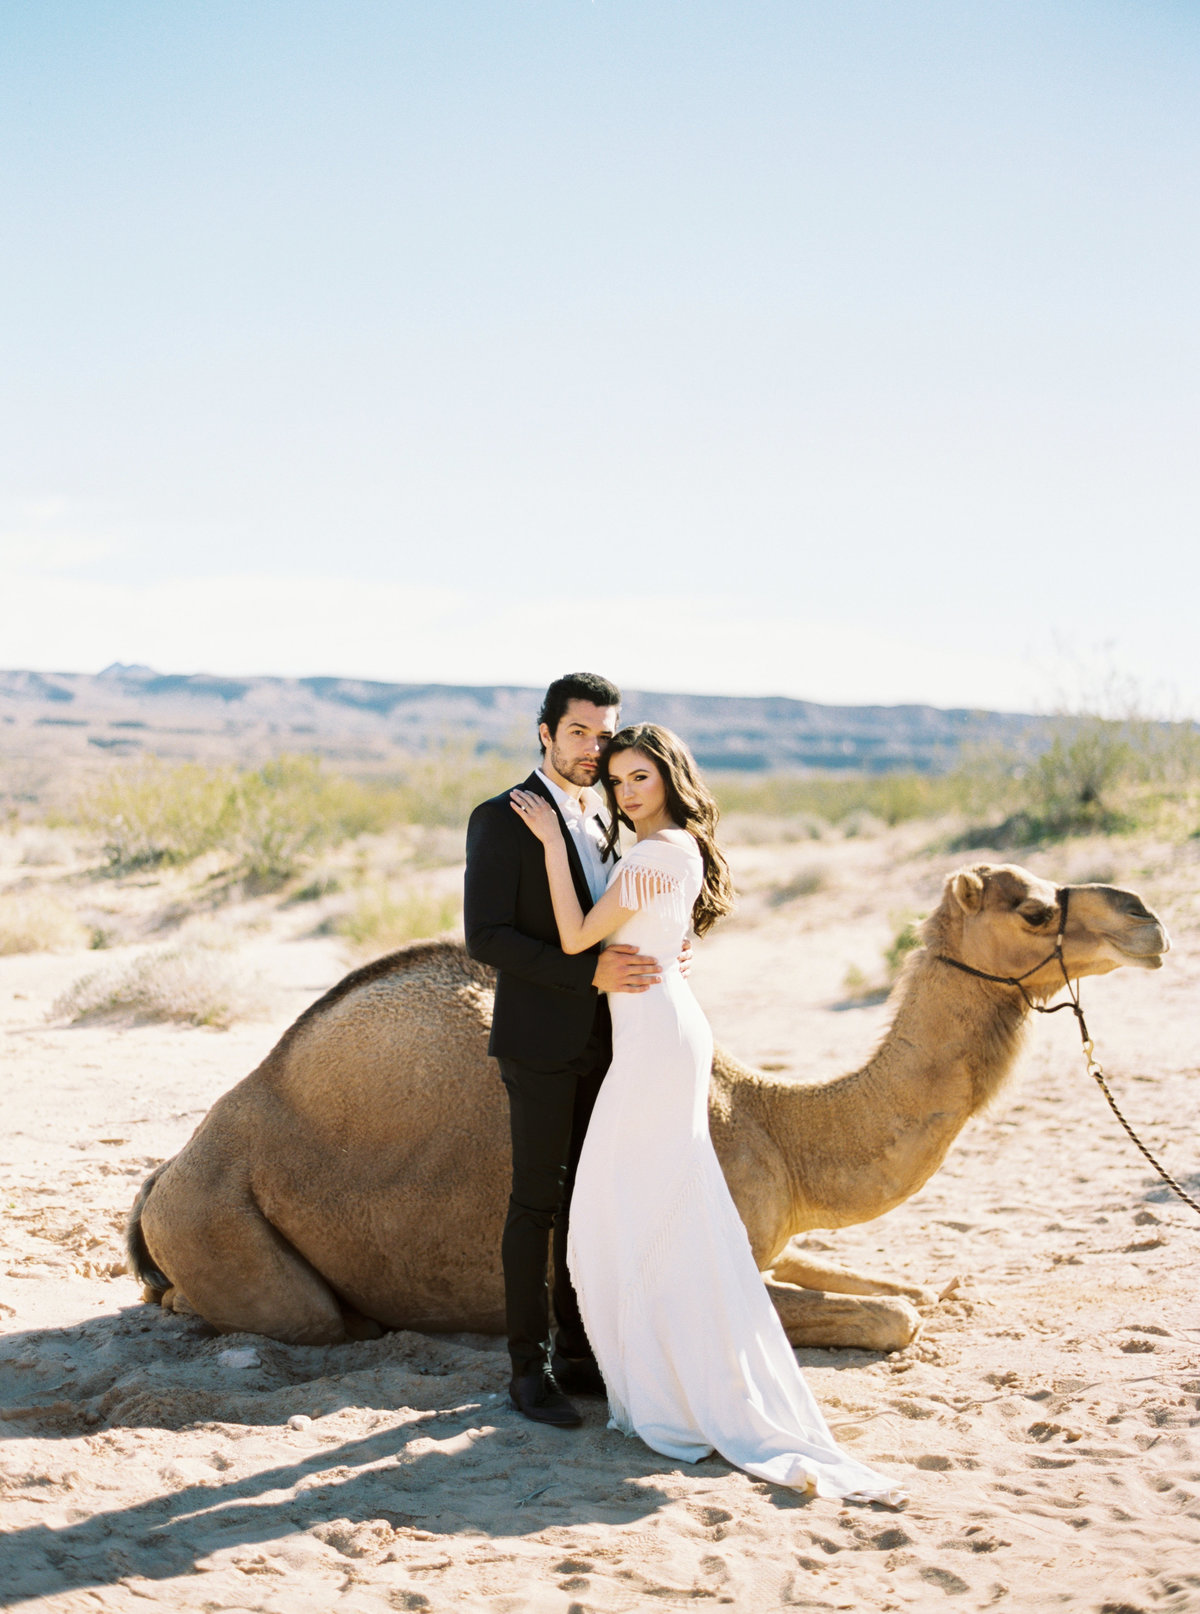 philip-casey-photography-desert-camel-editorial-session-11